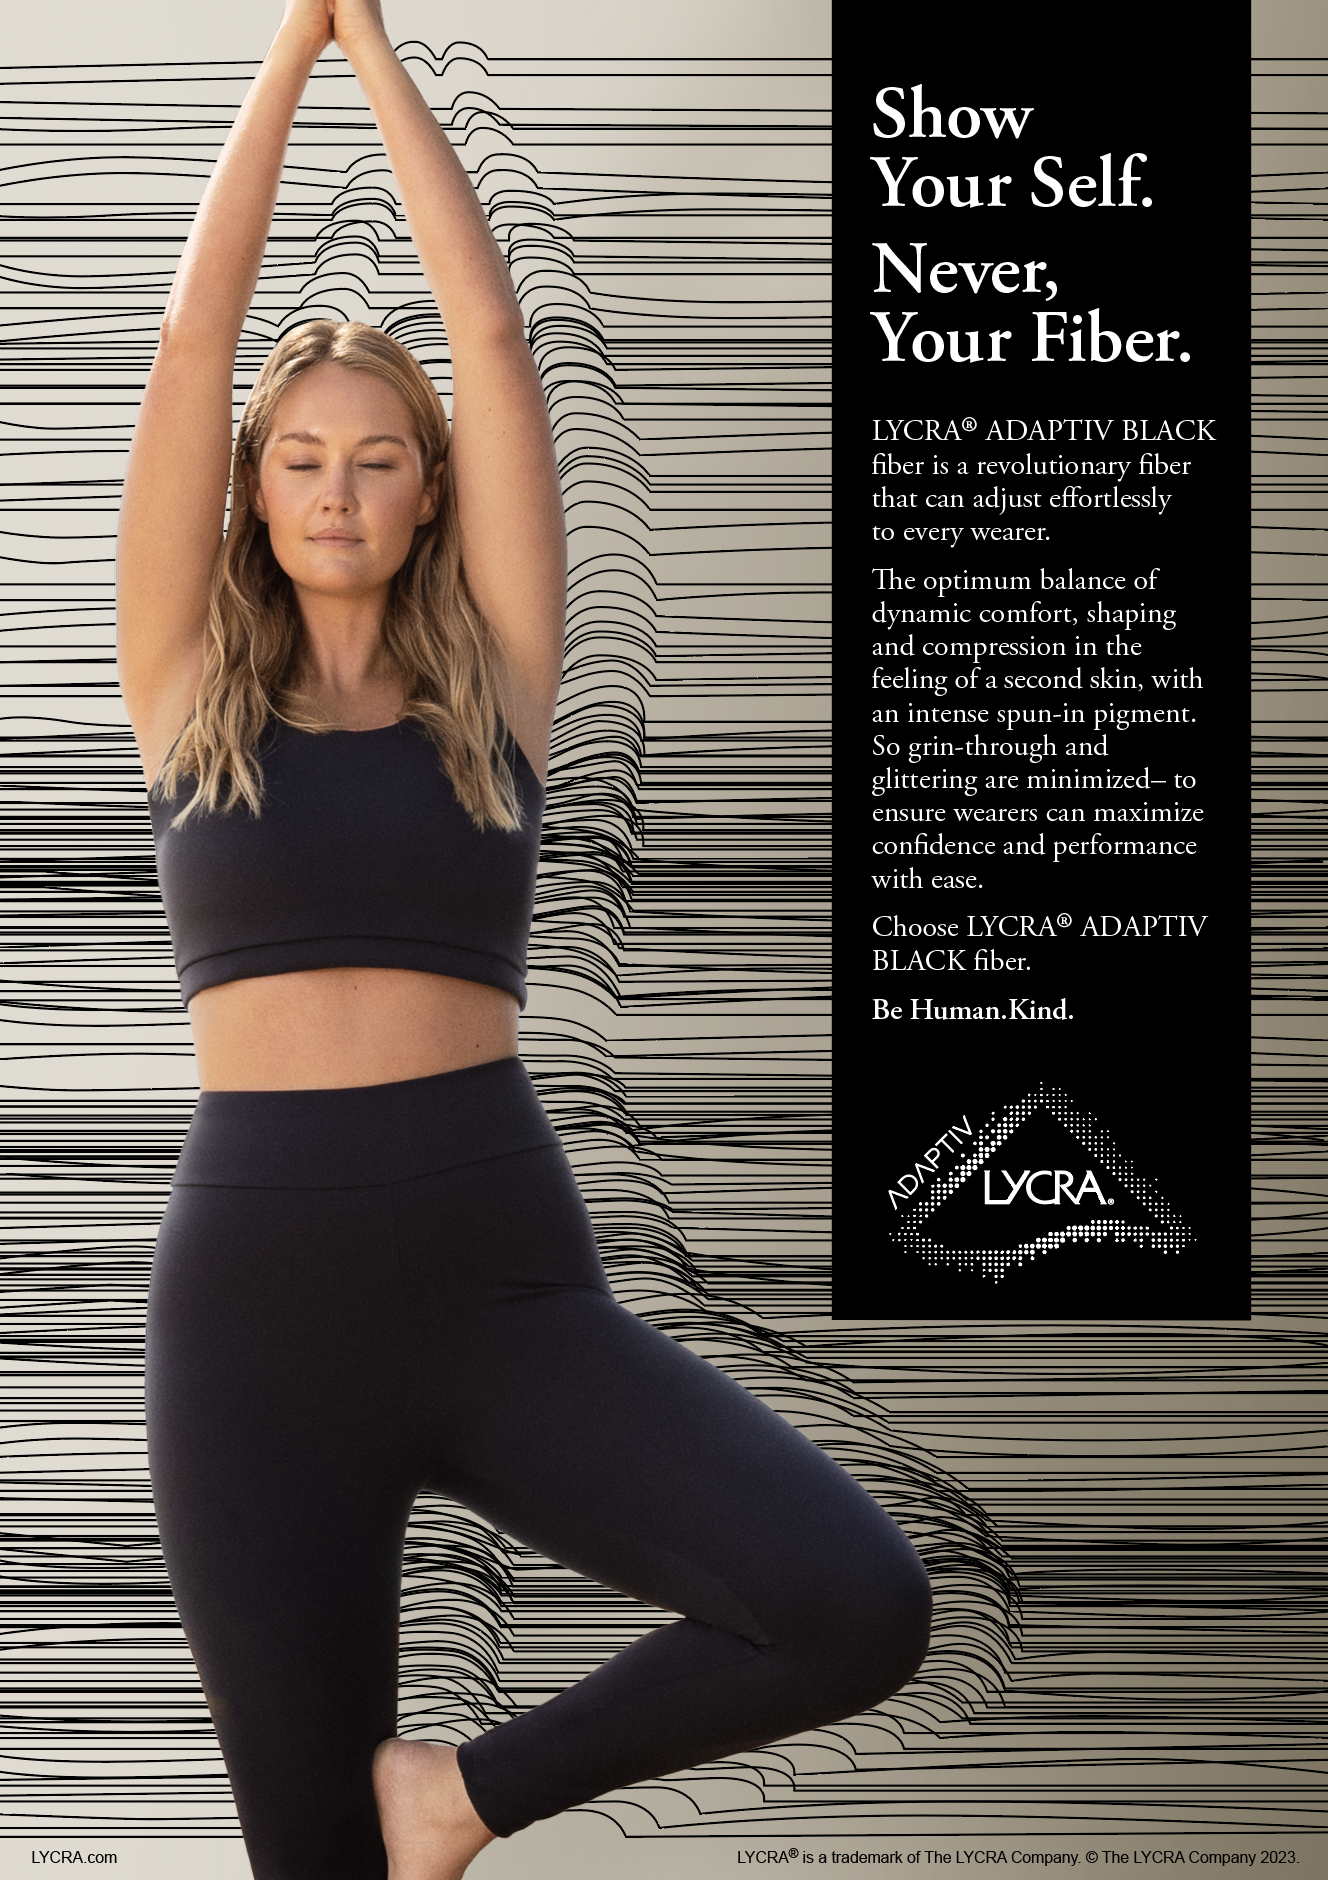 Business opportunity in activewear fabrics - The Textile Magazine